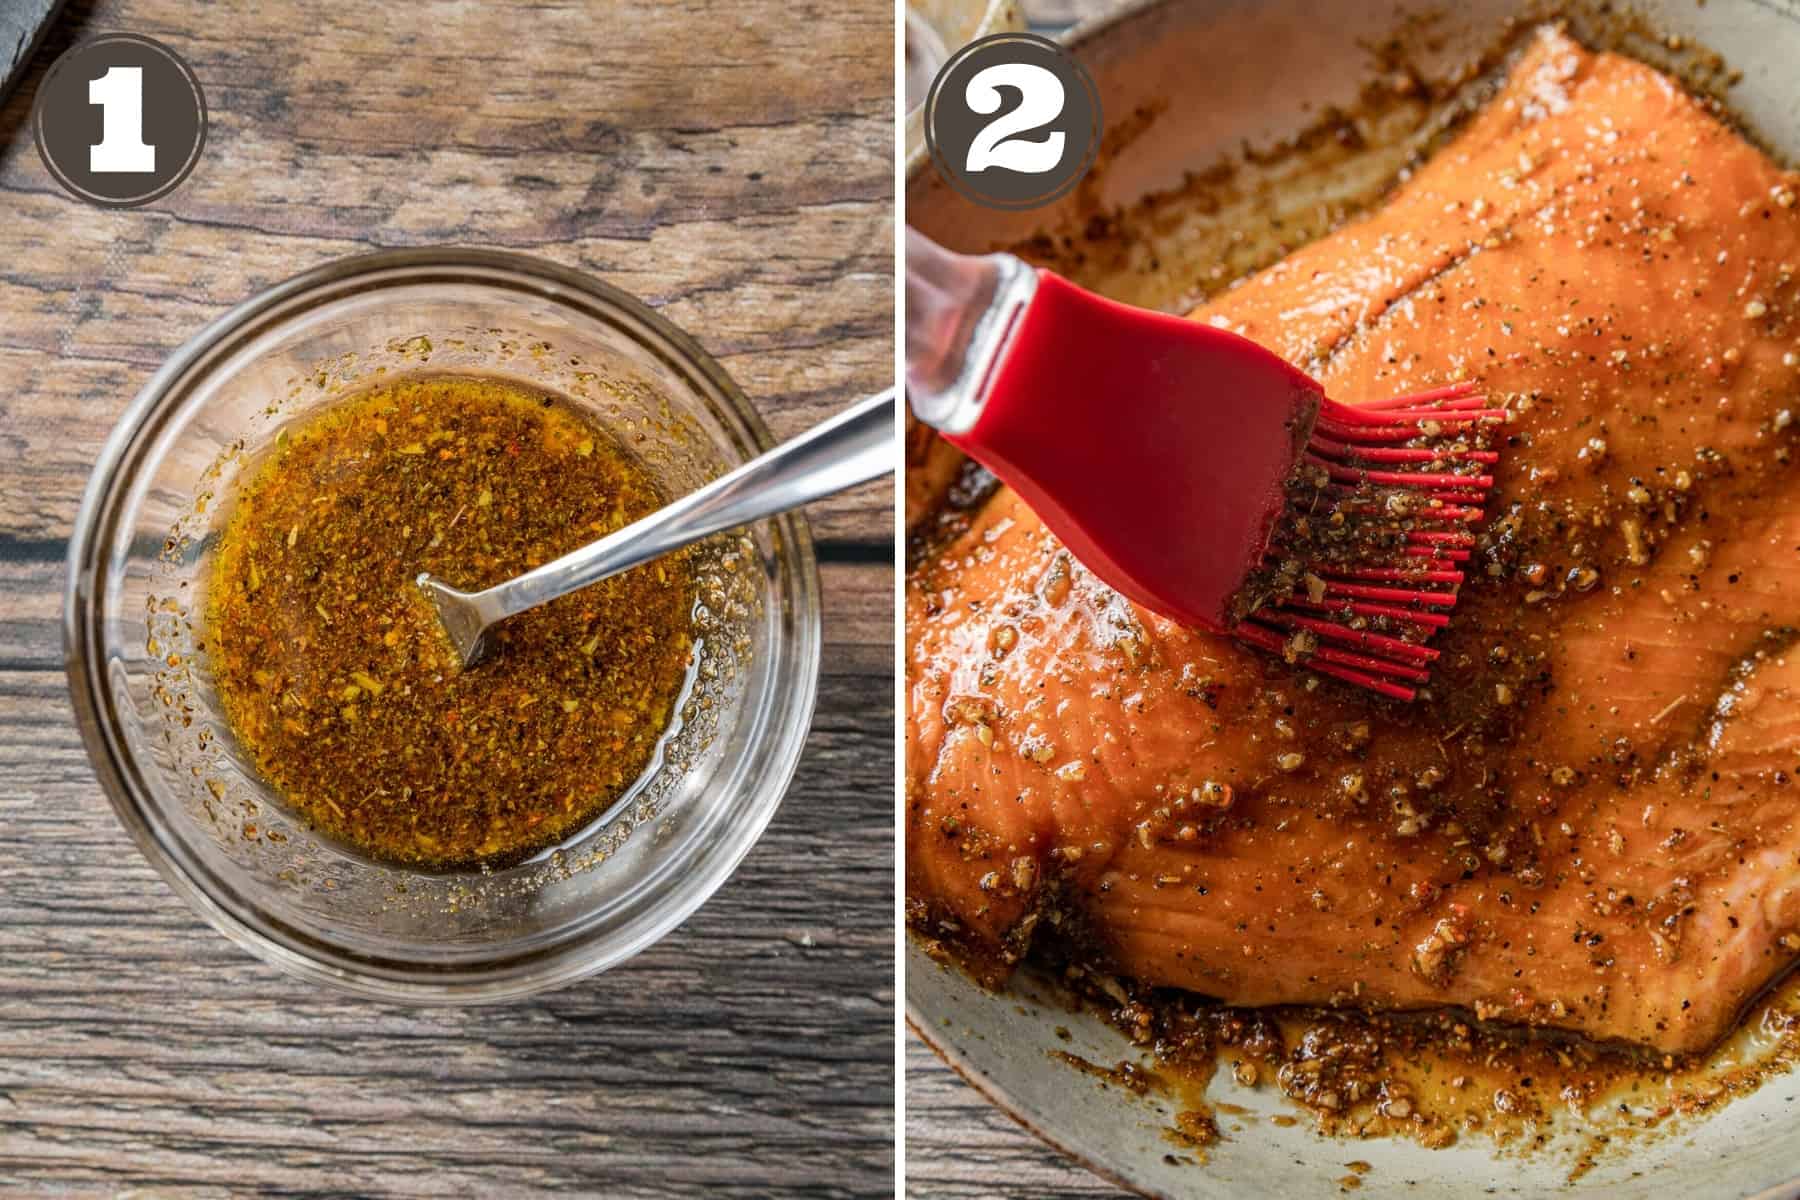 Side by side photos showing salmon marinade in a glass bowl and a salmon fillet being brushed with marinade.